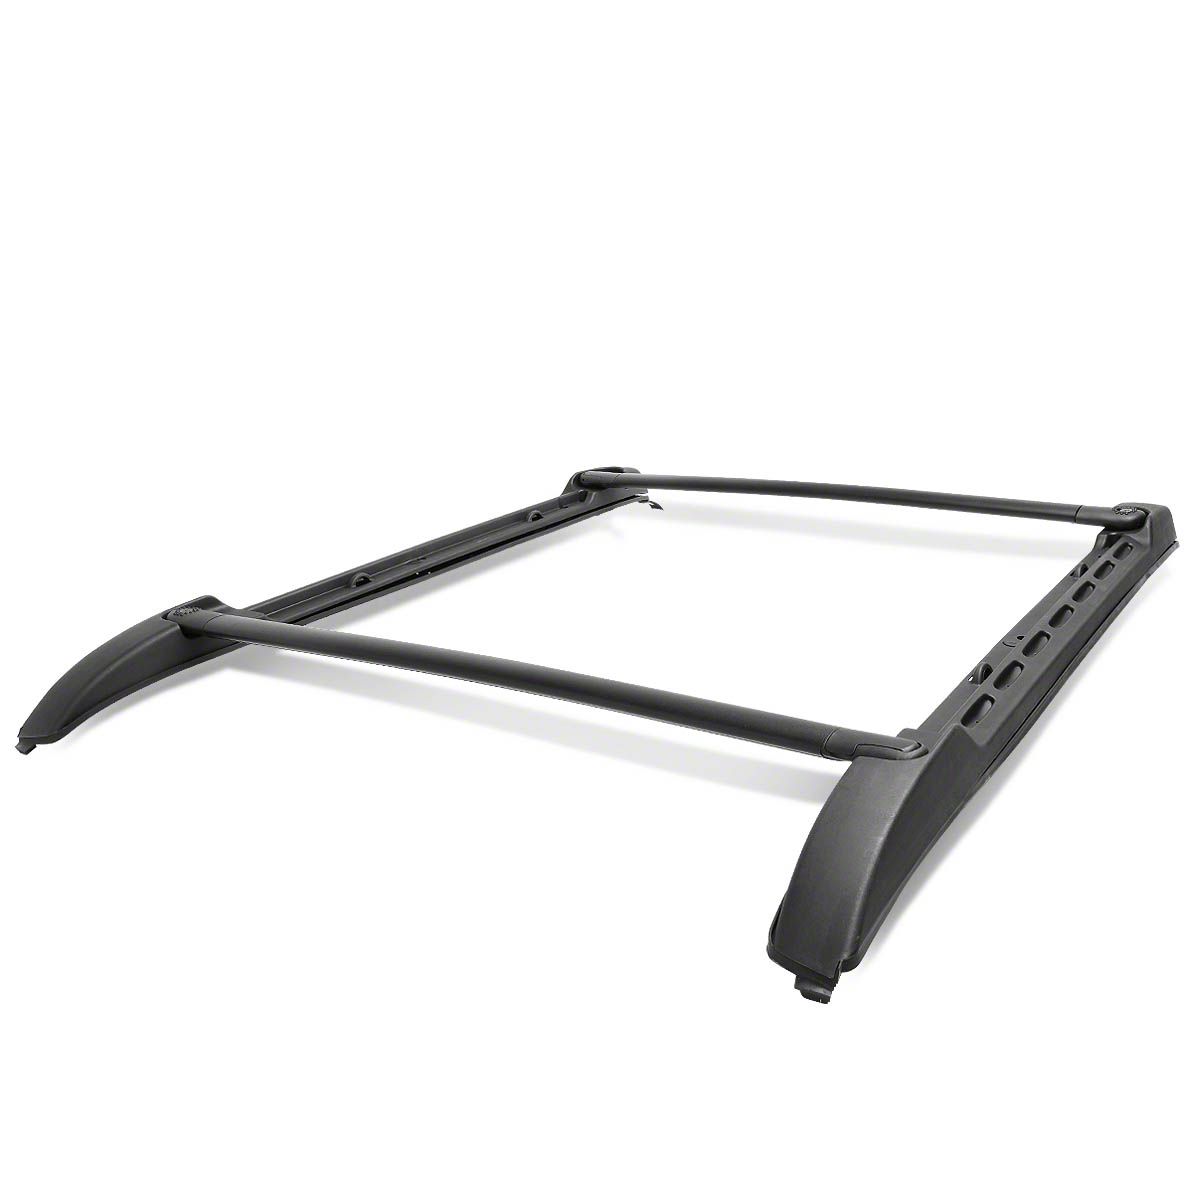 Top Roof Rack Cross Bars Luggage Carrier For 2005-2019 Toyota Tacoma OE Style